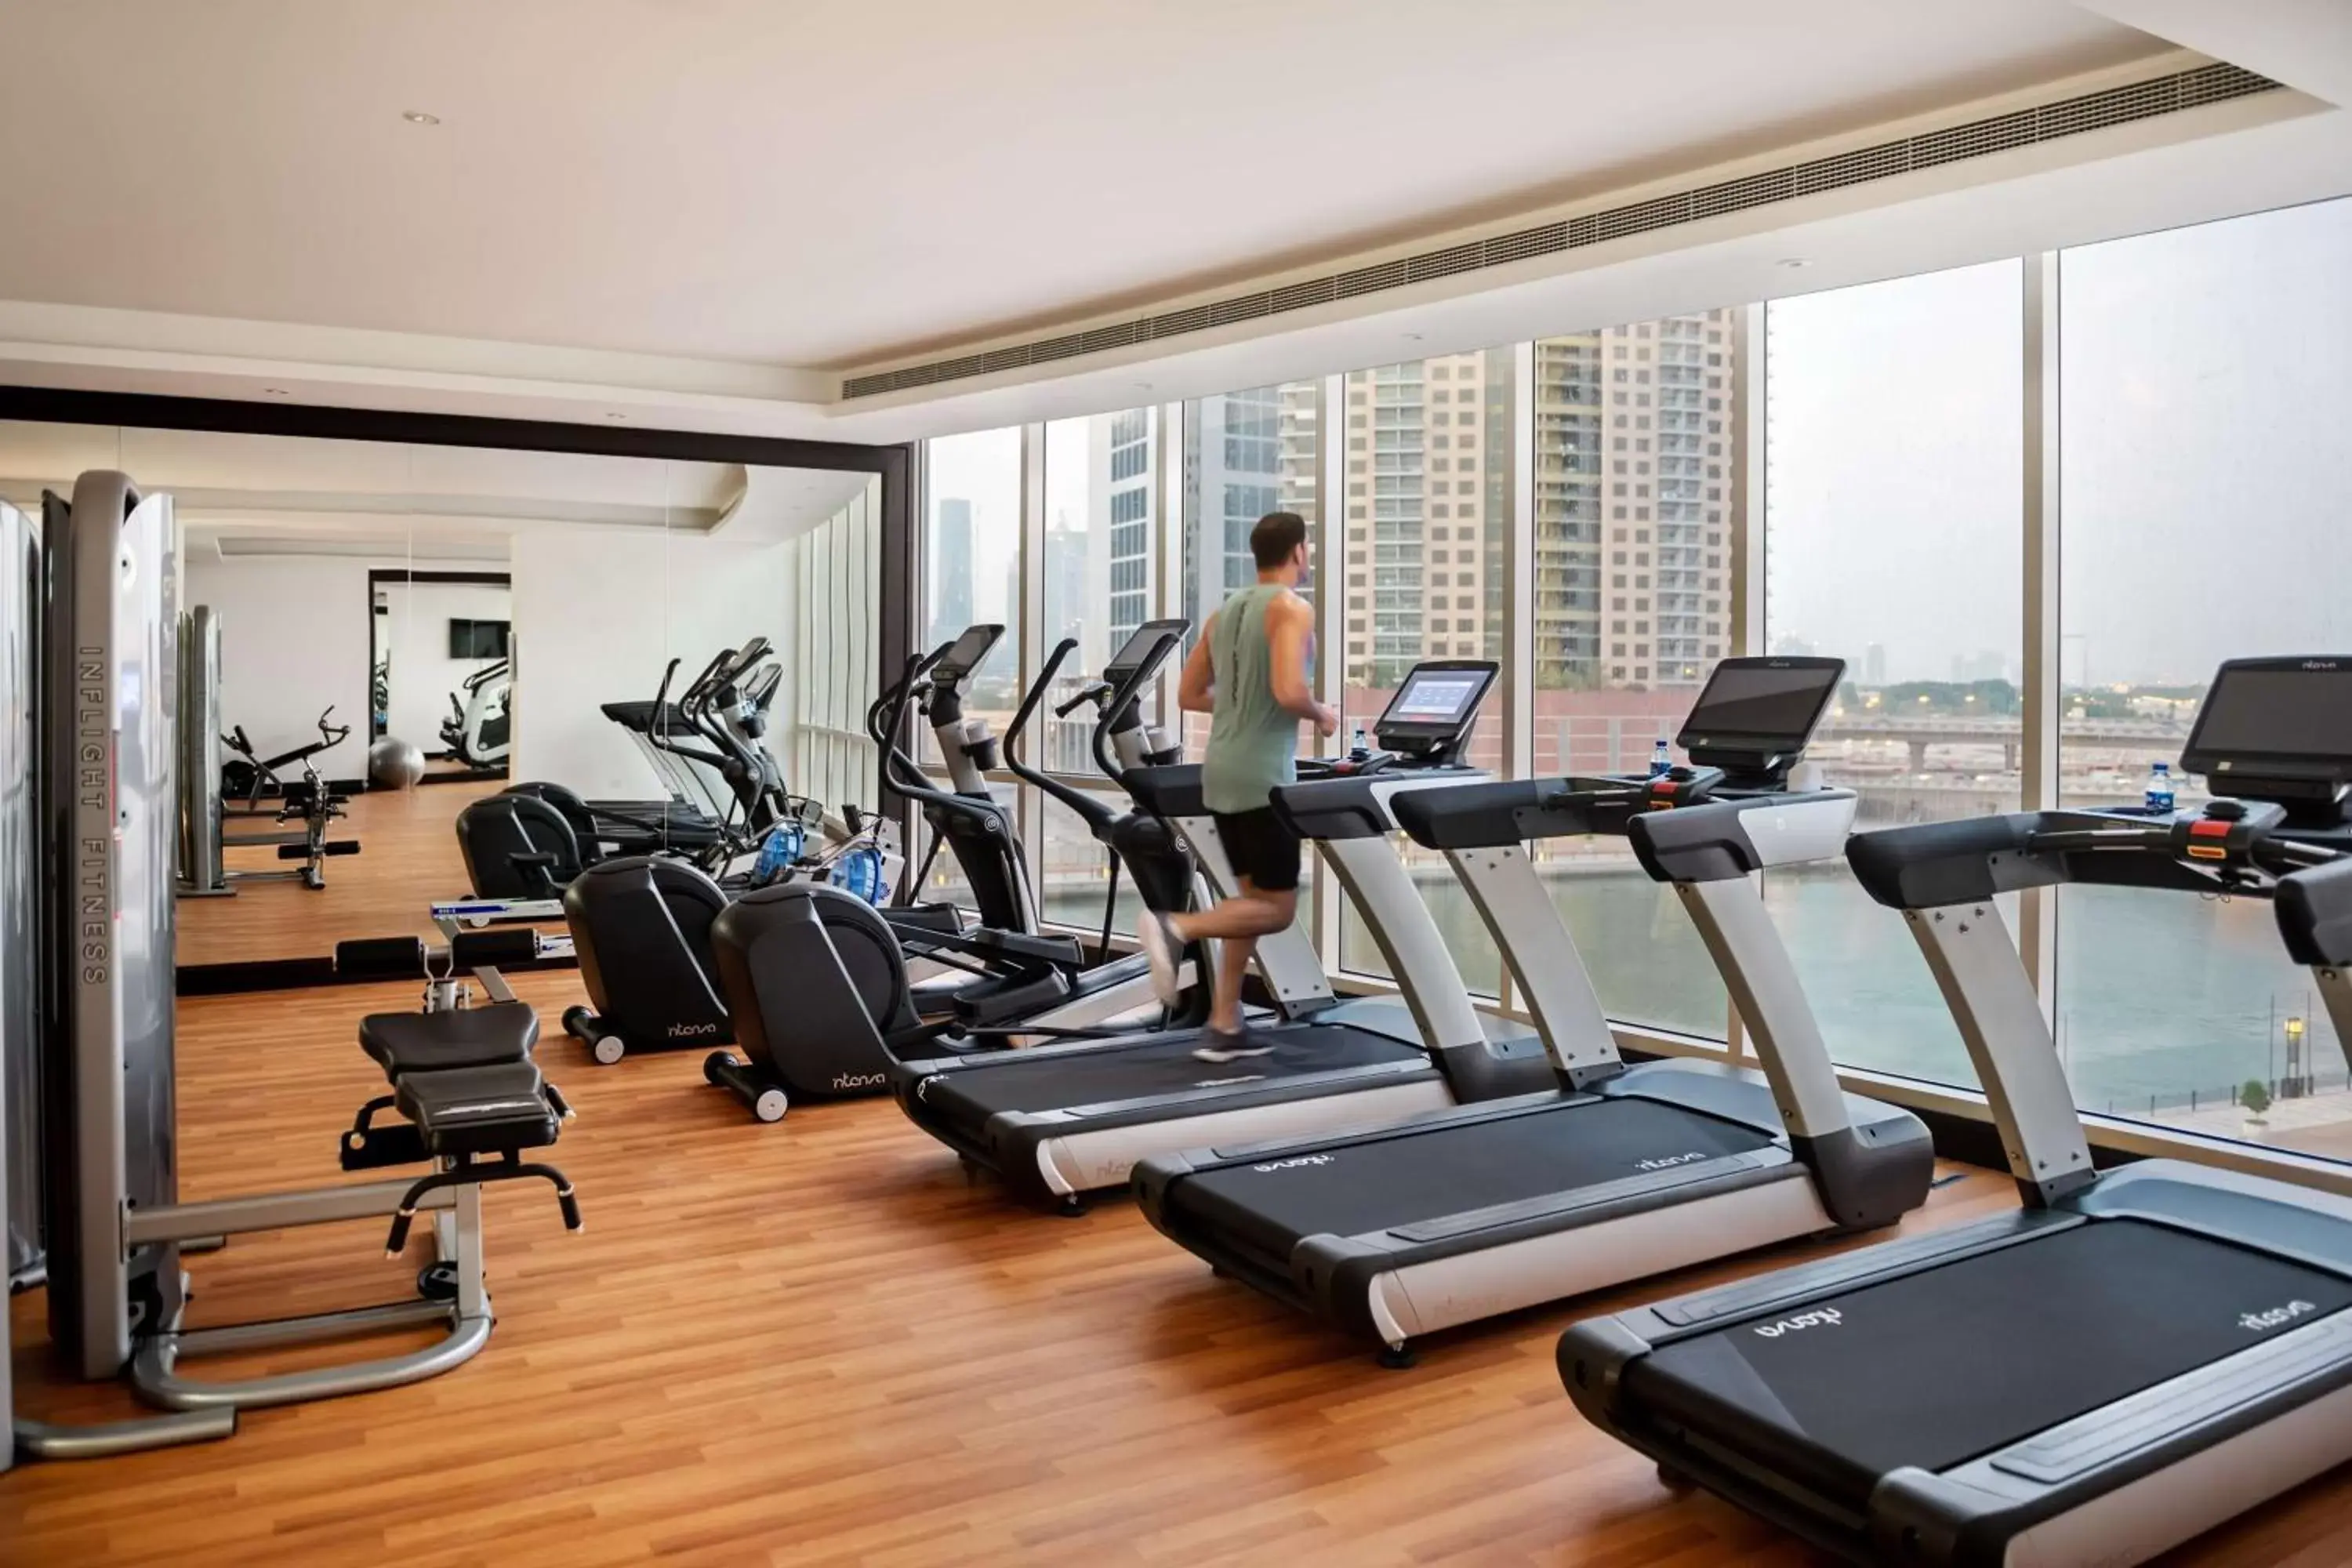 Guests, Fitness Center/Facilities in Radisson Blu Hotel, Dubai Canal View